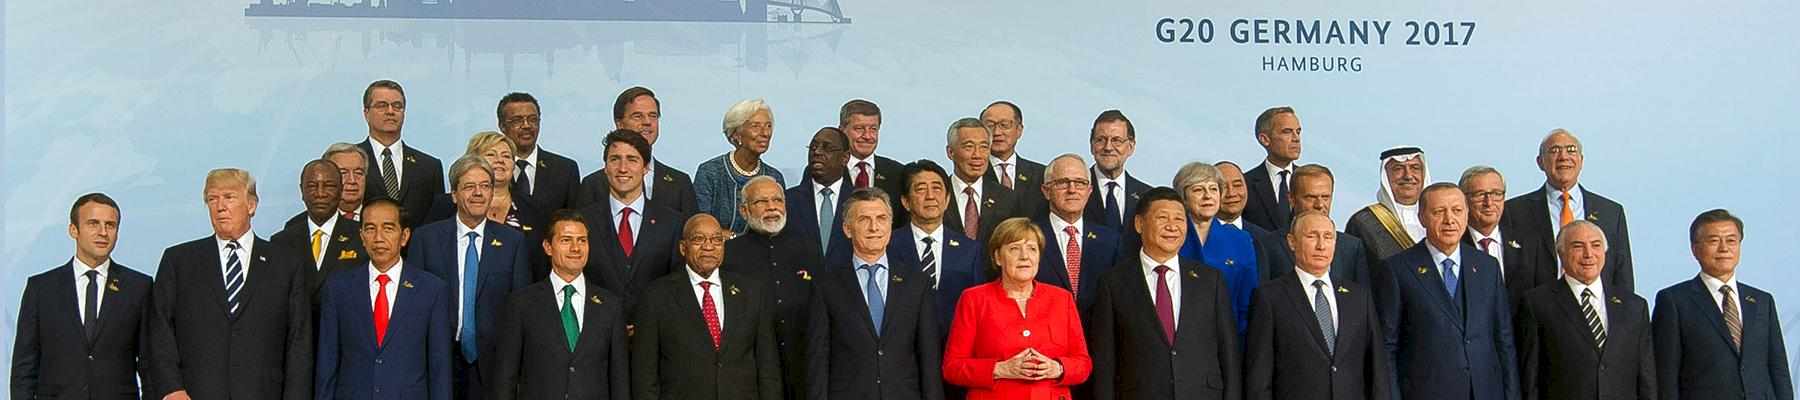 Heads of States and Government during a family photo at the G20 Leaders summit in Hamburg, Germany © GCIS / CC 2.0